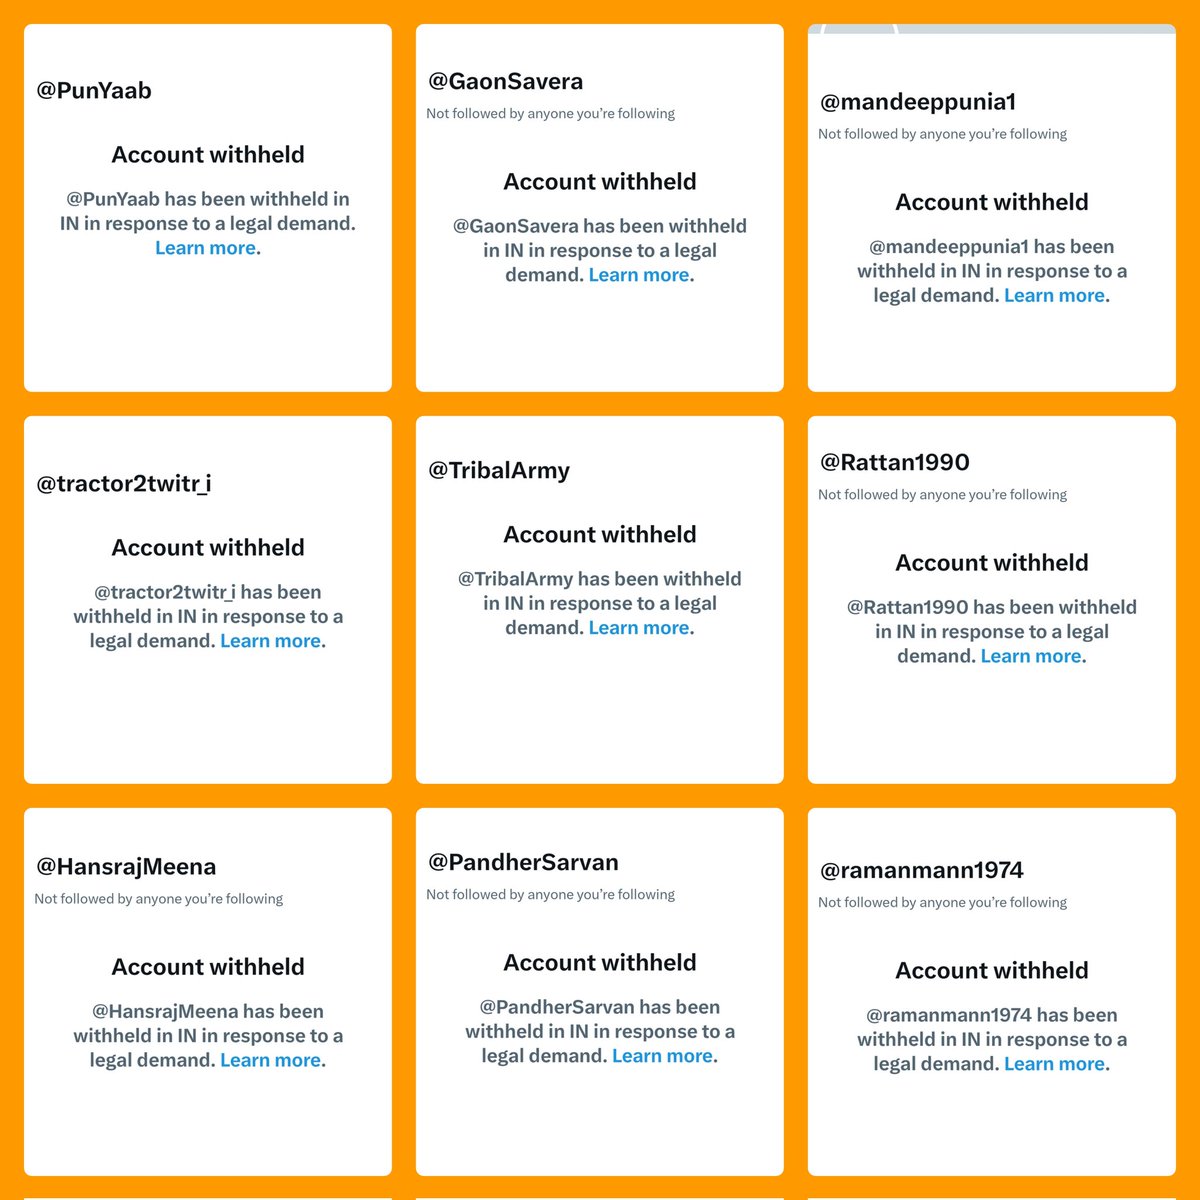 Accounts_Suspended: depicts the accounts of various independent journalists/unions, withheld recently by X under govt. orders. (Source: by Mohd. Zubair, an independent fact checker from India)